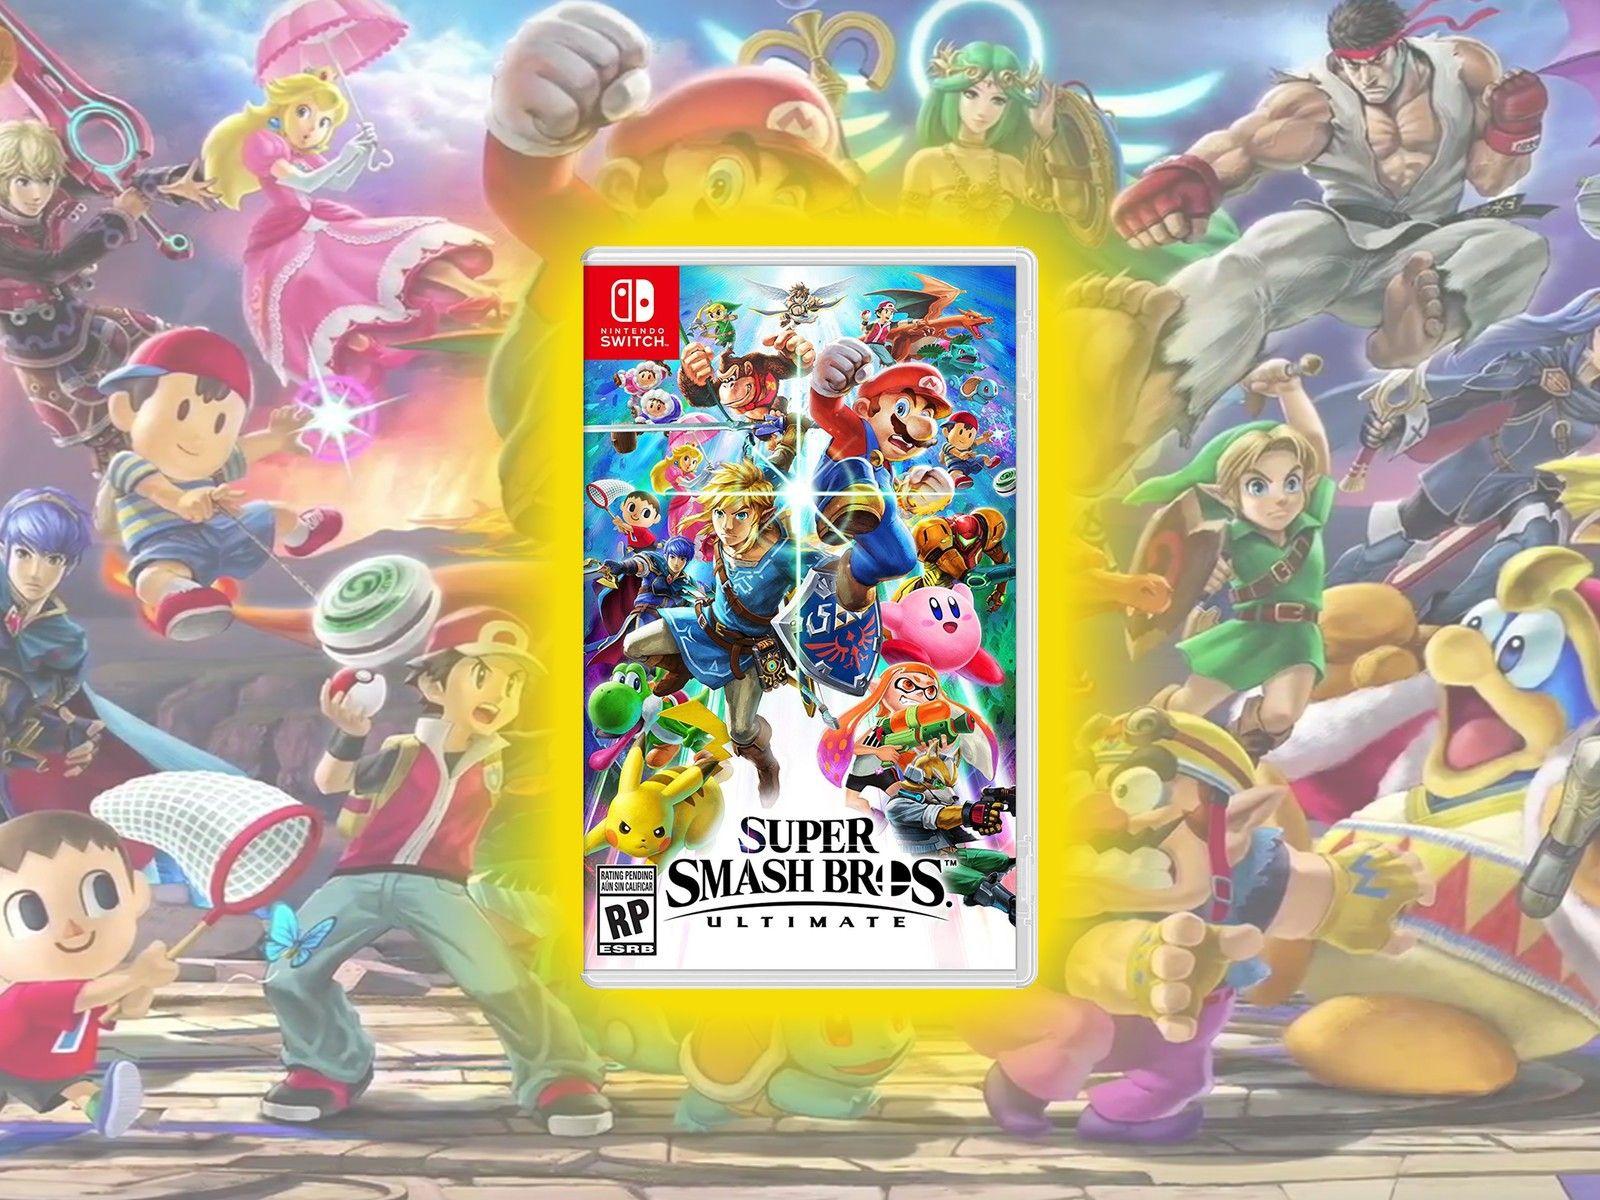 Super Smash Bros. Ultimate available for pre